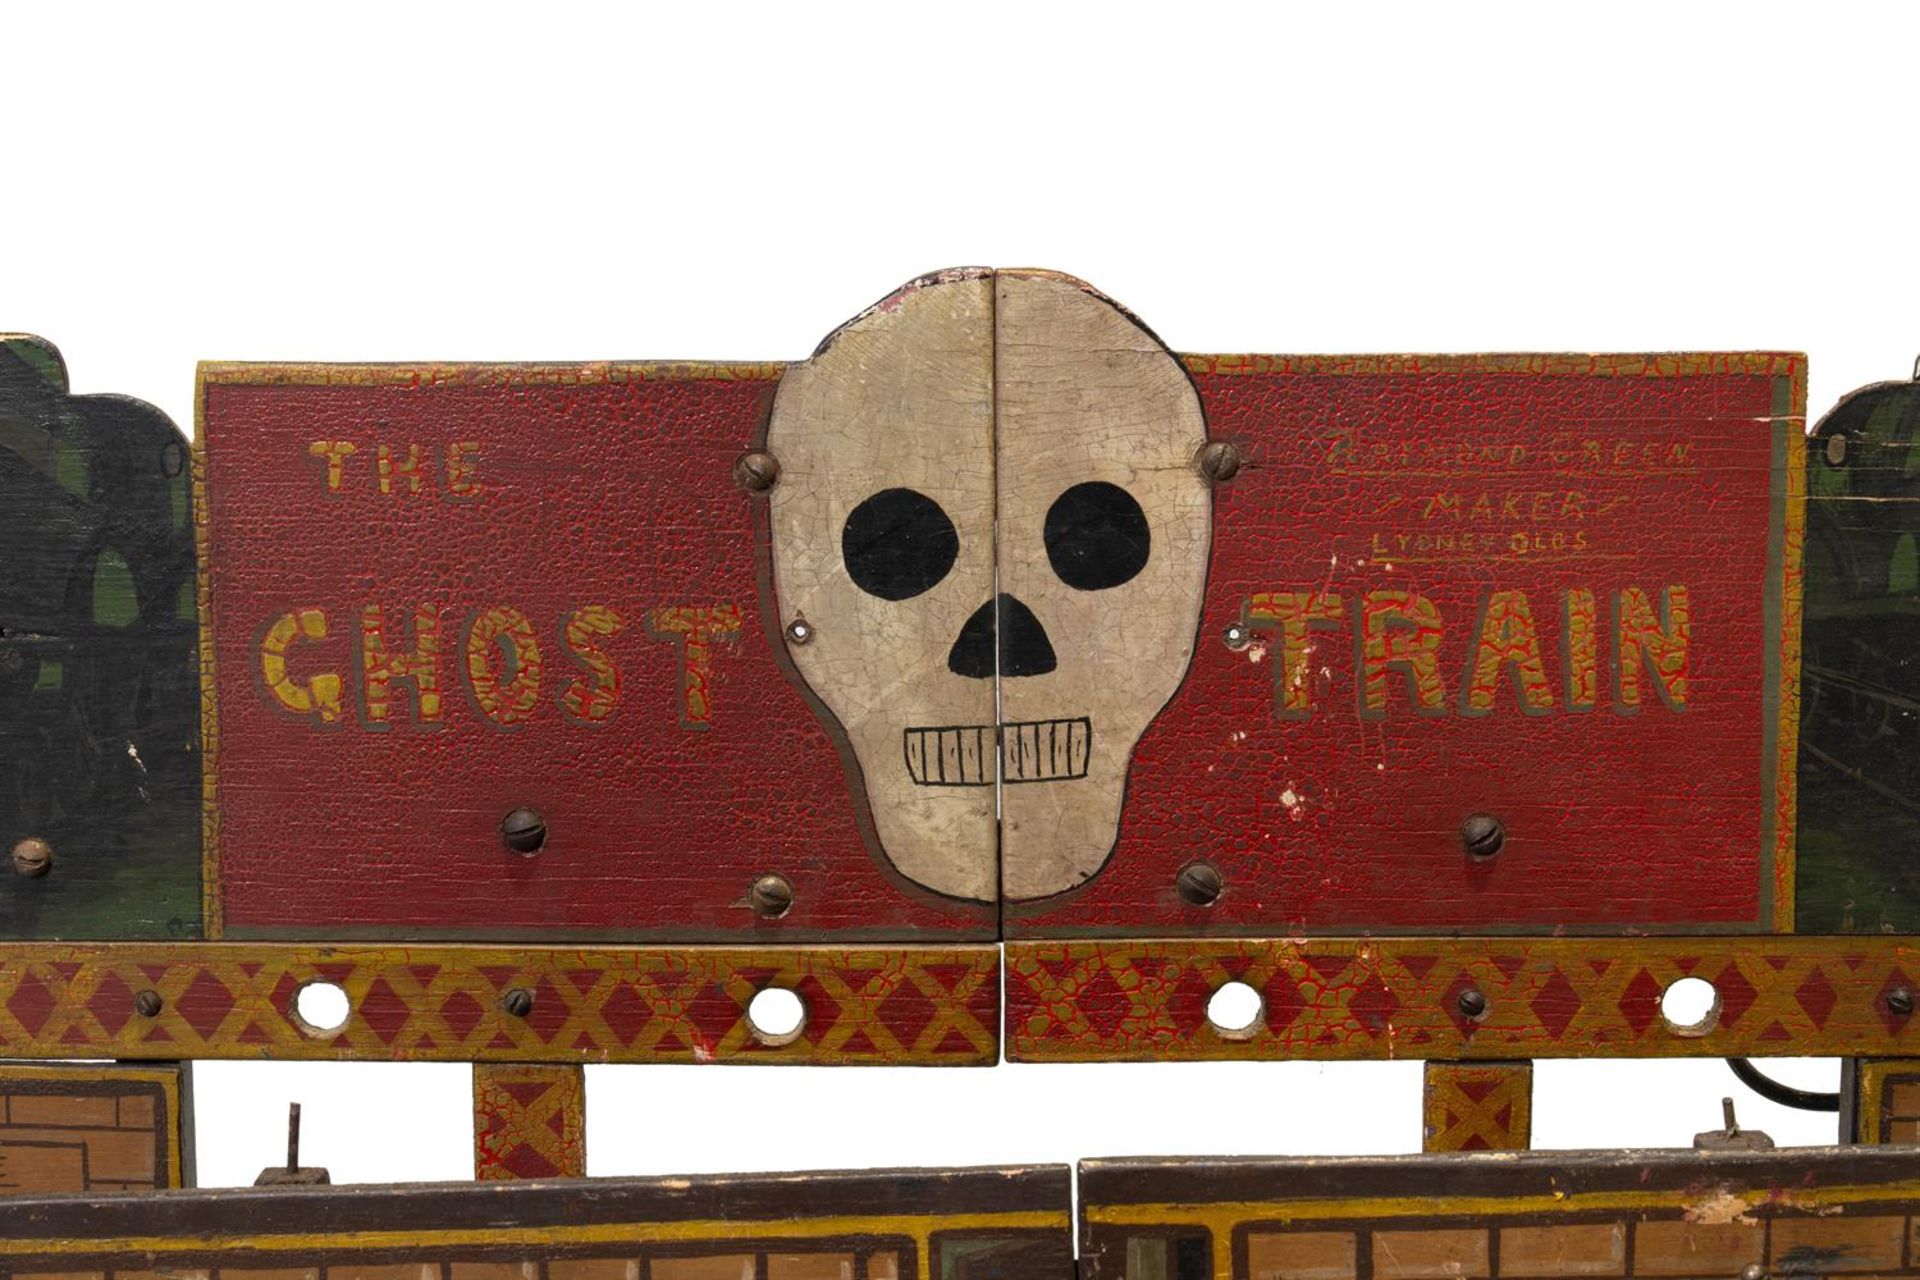 A SCRATCHBUILT PAINTED WOOD AND METAL SCALE MODEL AMUSEMENT GHOST TRAIN RIDE, 20TH CENTURY - Image 2 of 5